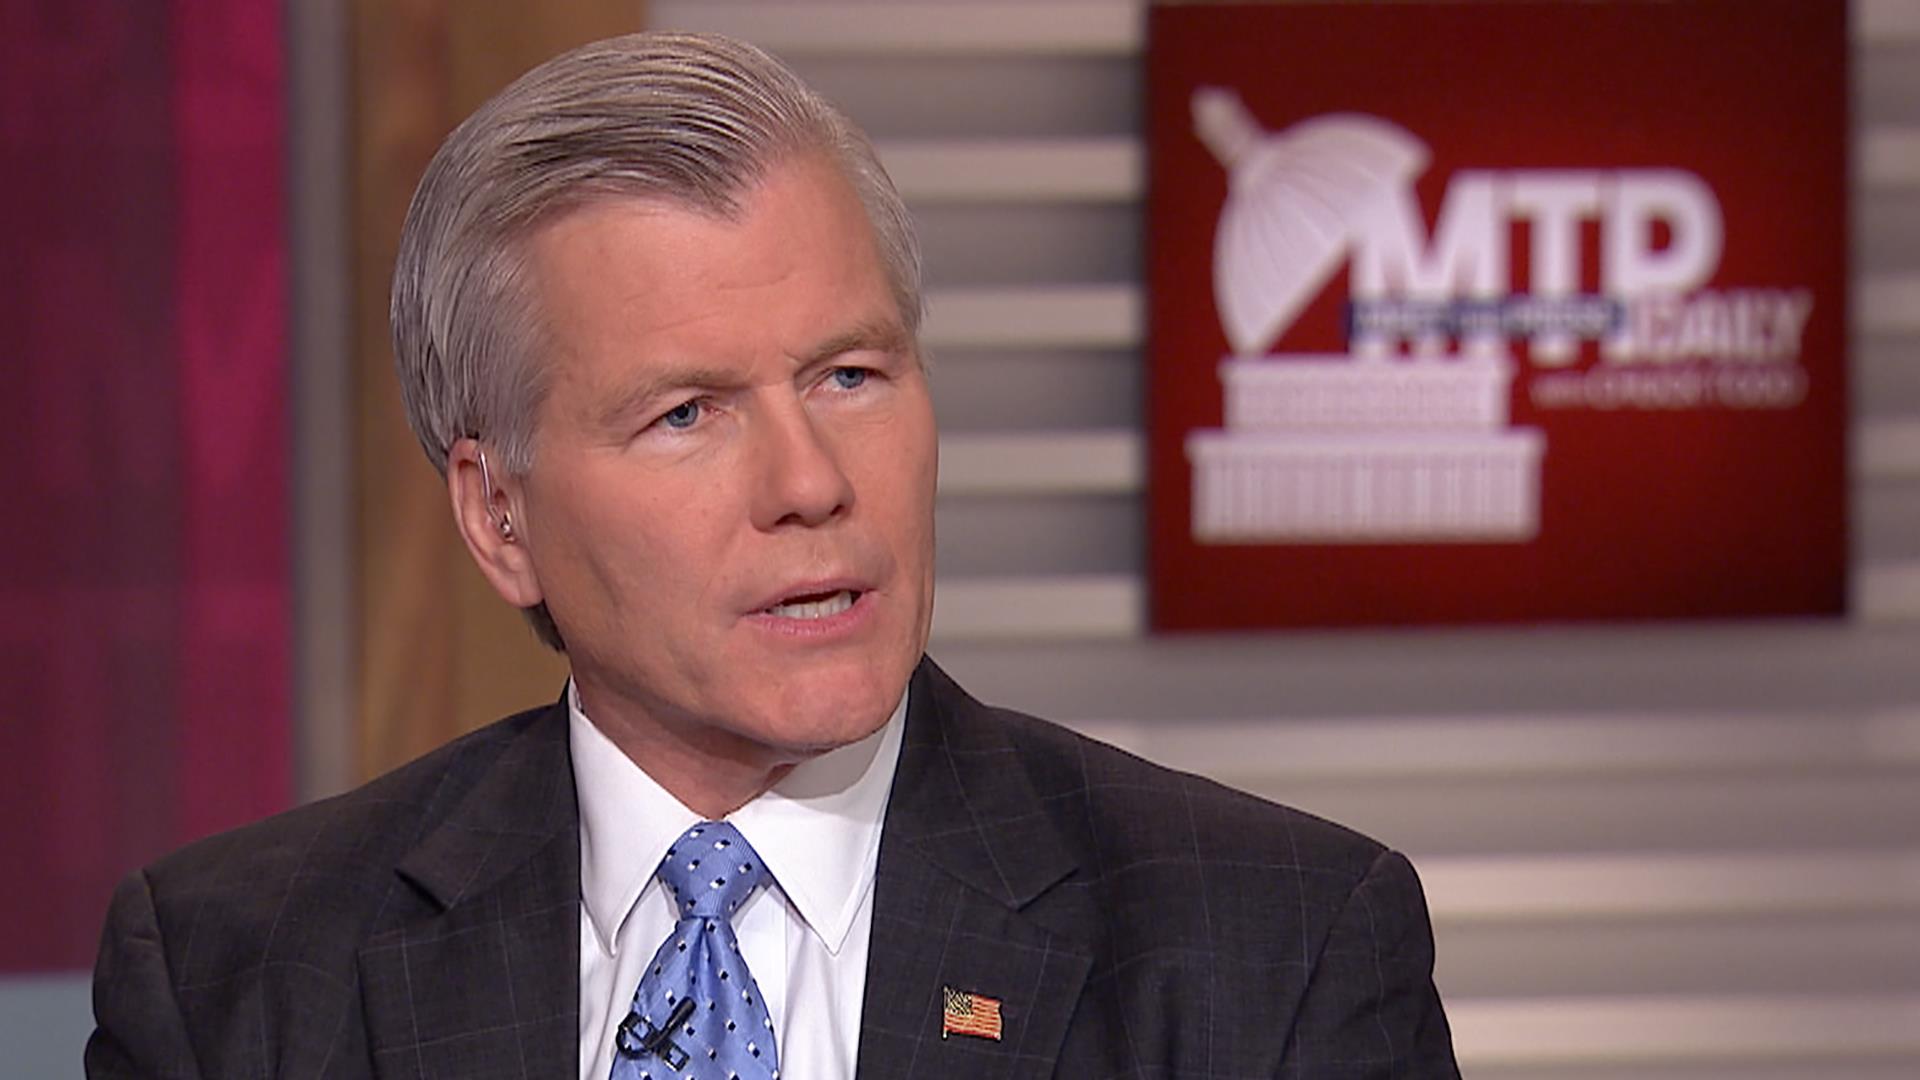 Ex-Governor Bob McDonnell on SCOTUS overturning his conviction